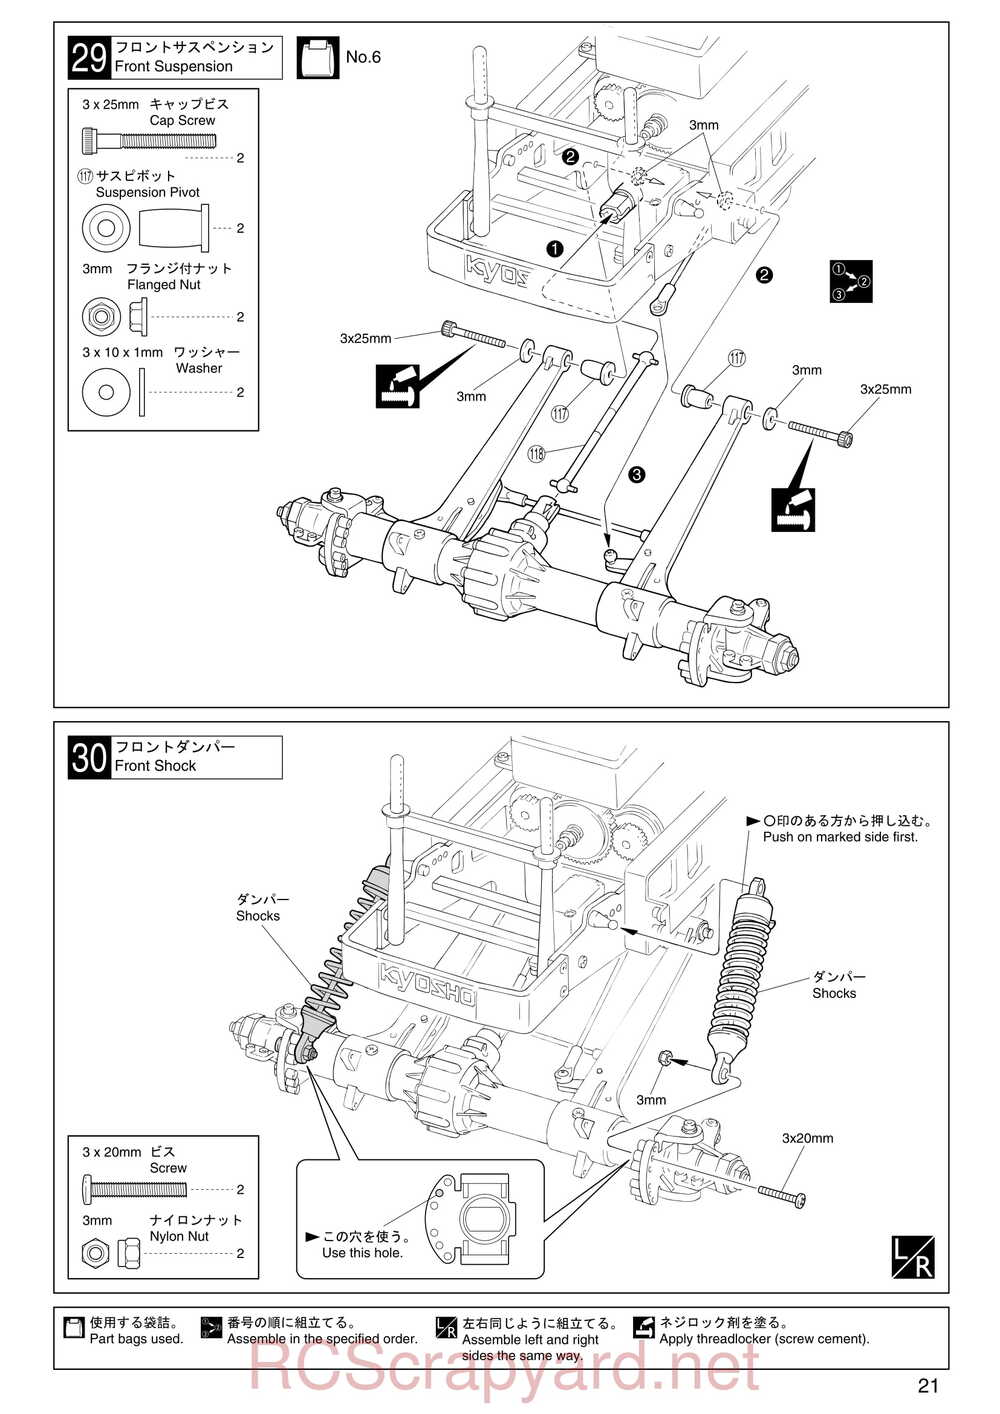 Kyosho - 30522b - Twin-Forcec-SP - Manual - Page 21